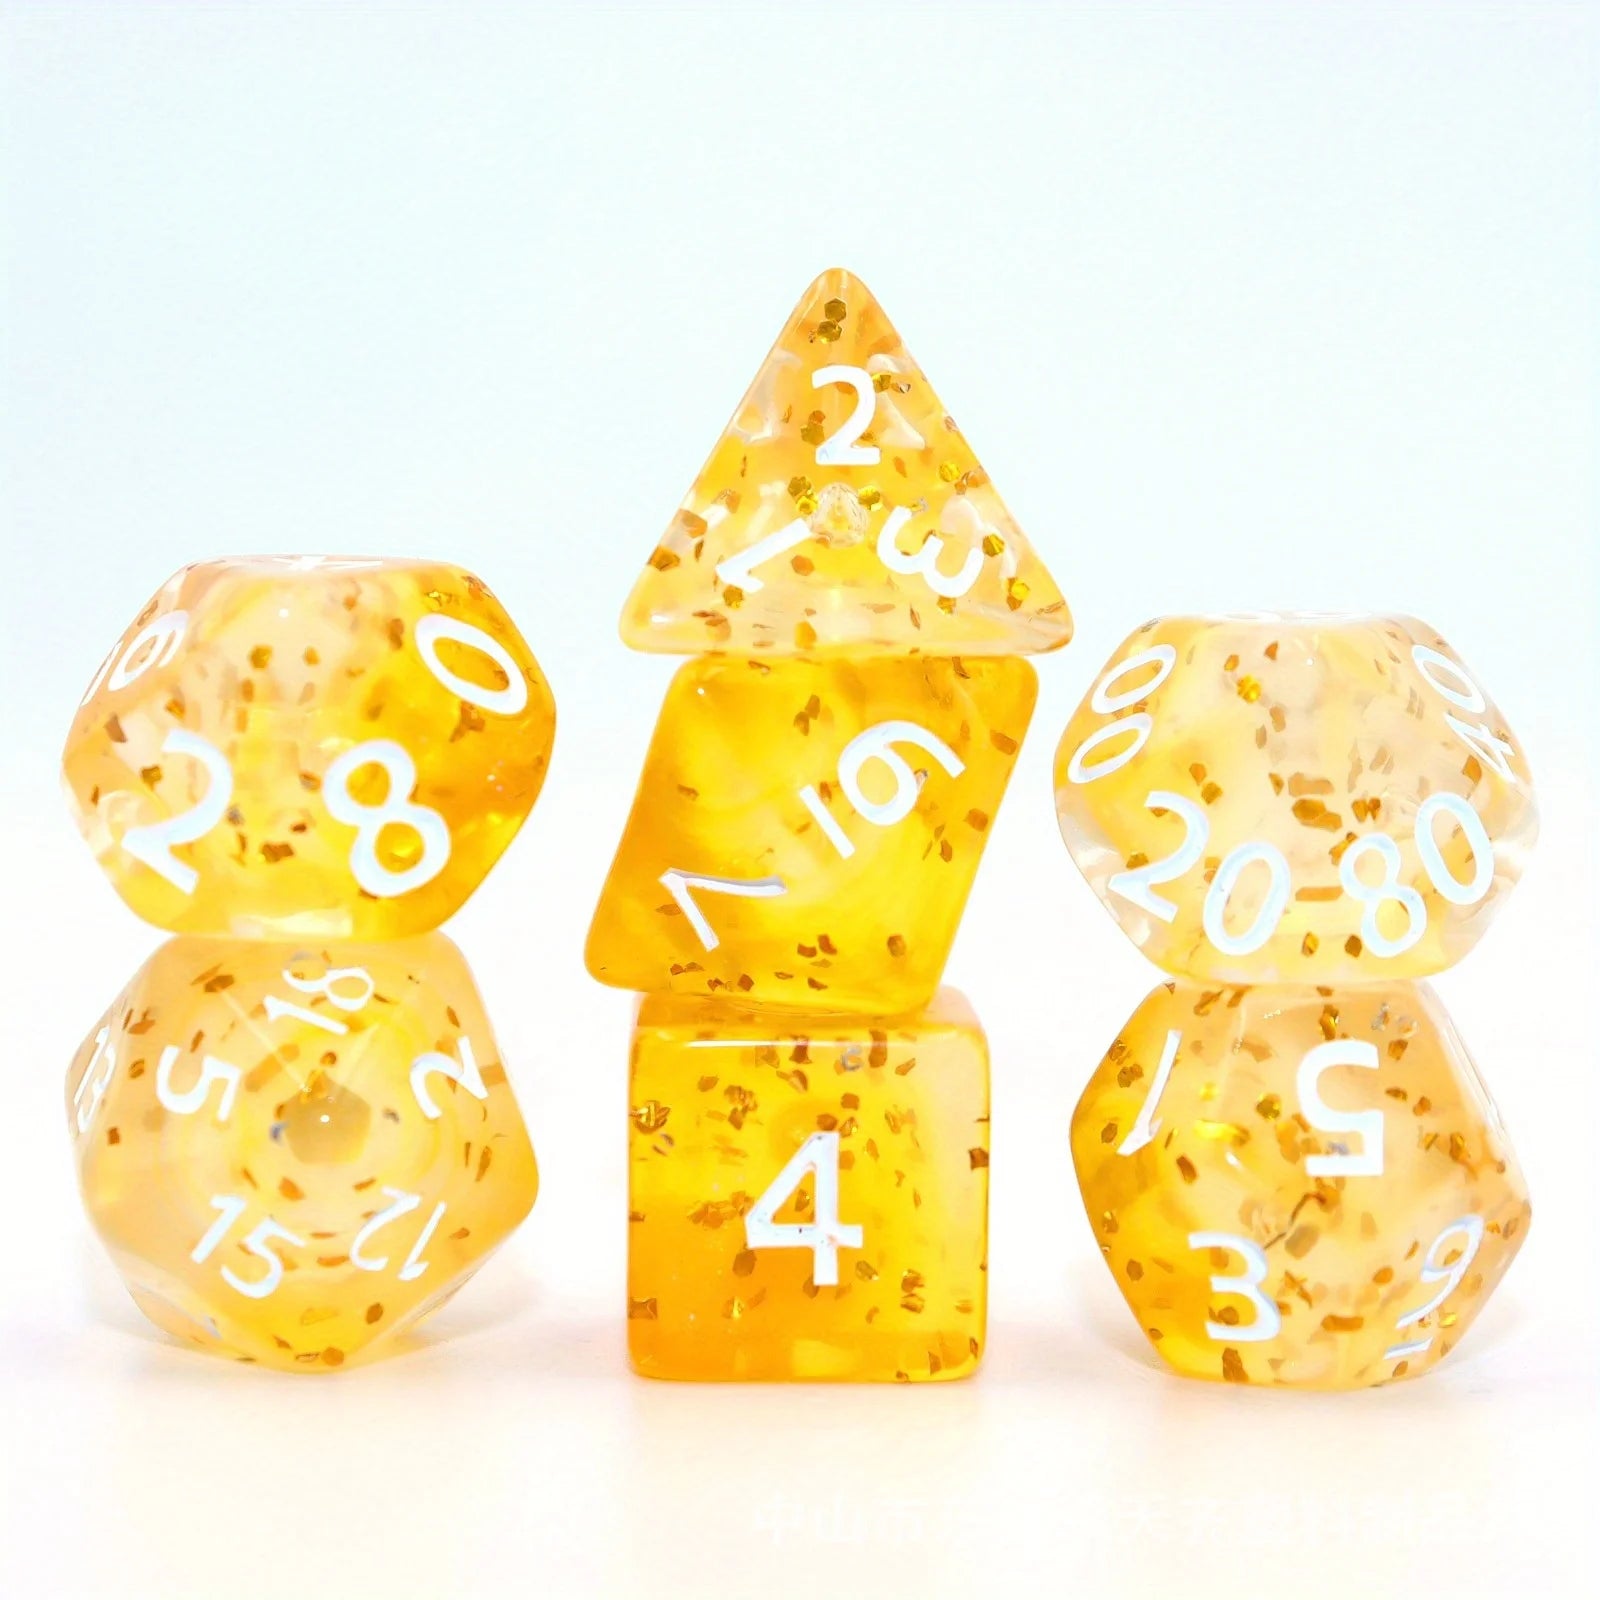 7pcs Set Crystal Style DND Dice Set, Polyhedral Table Game Dice Role-Playing RPG Dice With Box Yellow